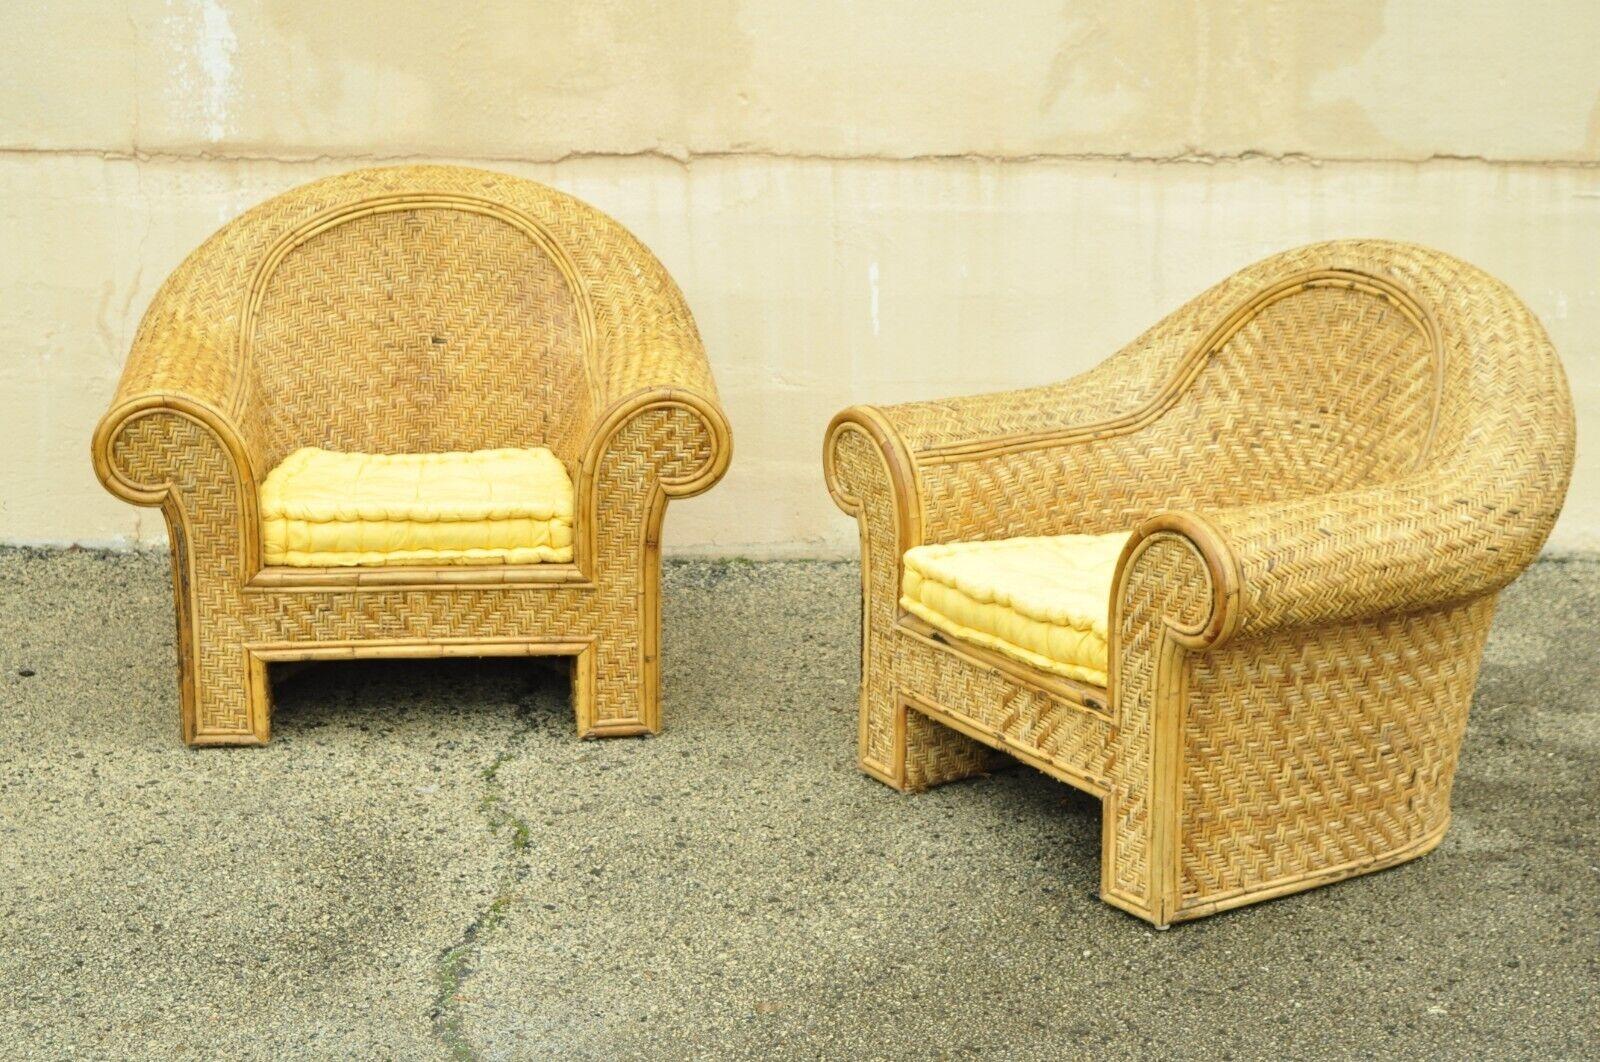 Ralph Lauren Attributed Large Woven Wicker Rattan Club Lounge Chairs - a Pair. Item featured is alLarge impressive size, sleek sculptural rattan/wicker form, loose cushions (later added and not original), quality vintage lounge chairs. Believed to